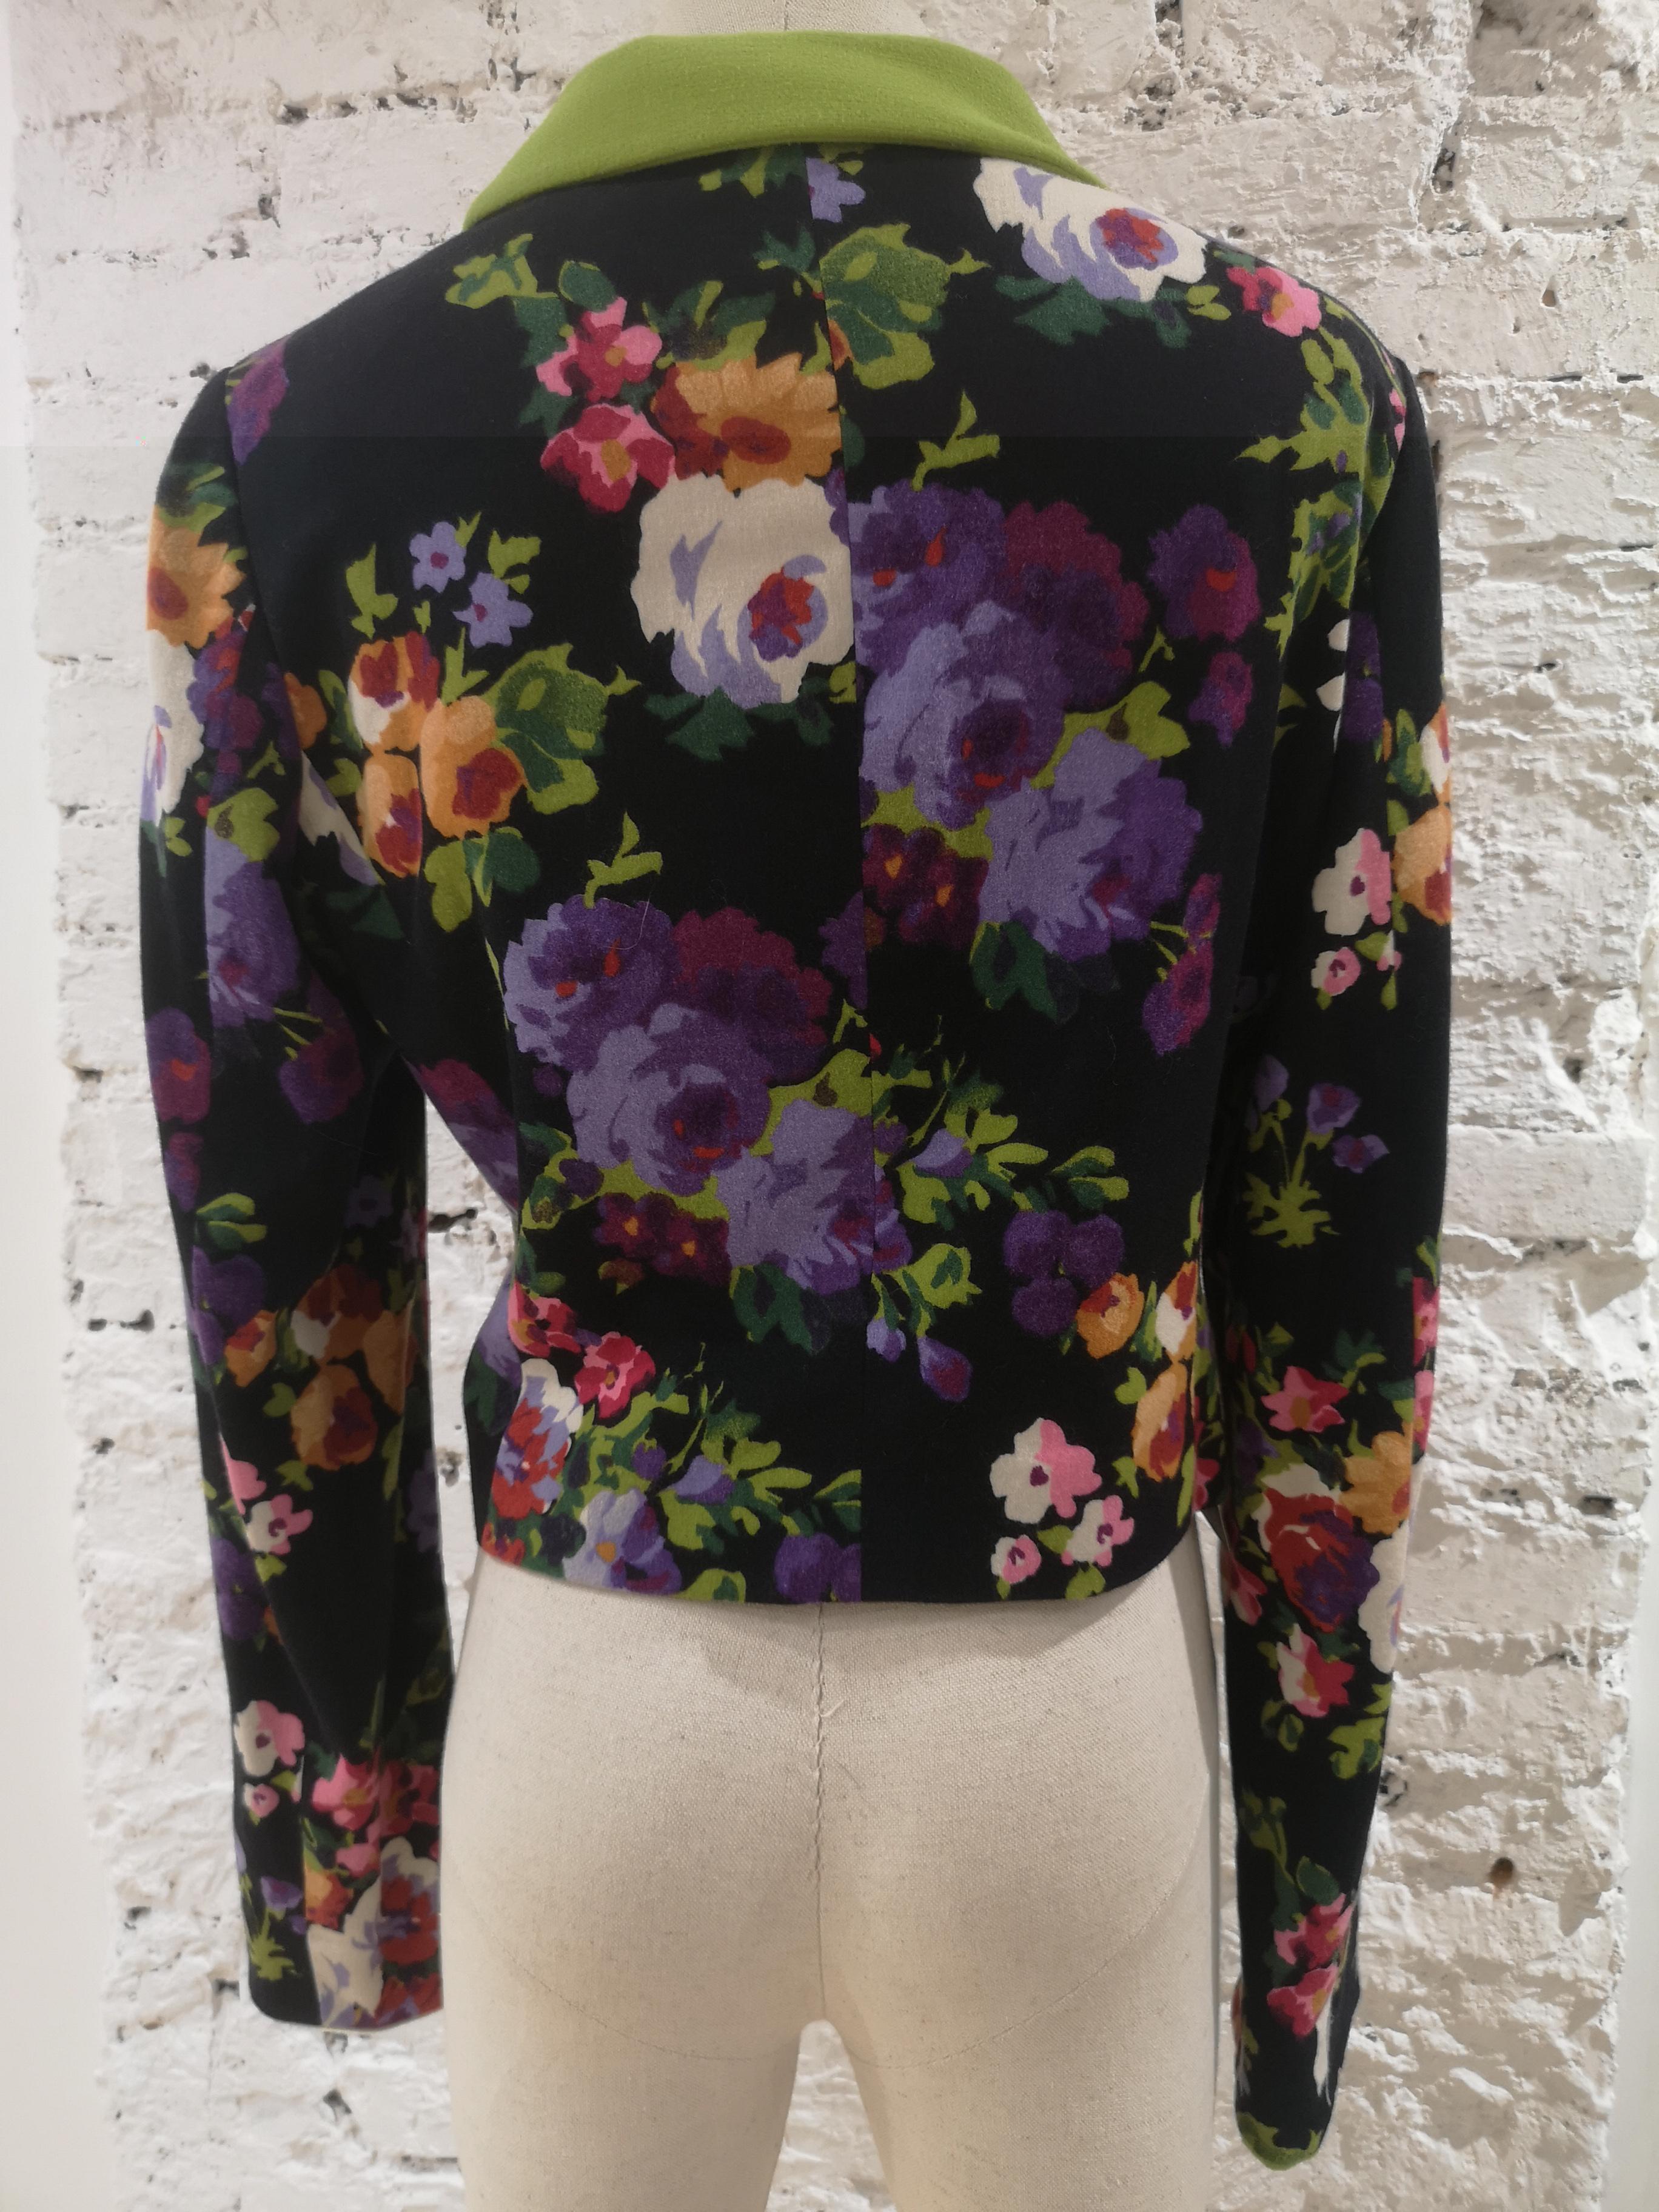 Moschino wool flowers jacket
totally made in italy in size 46
Fits smaller
total lenght 49 cm
shoulder 42 cm
shoulder to hem 68 cm 